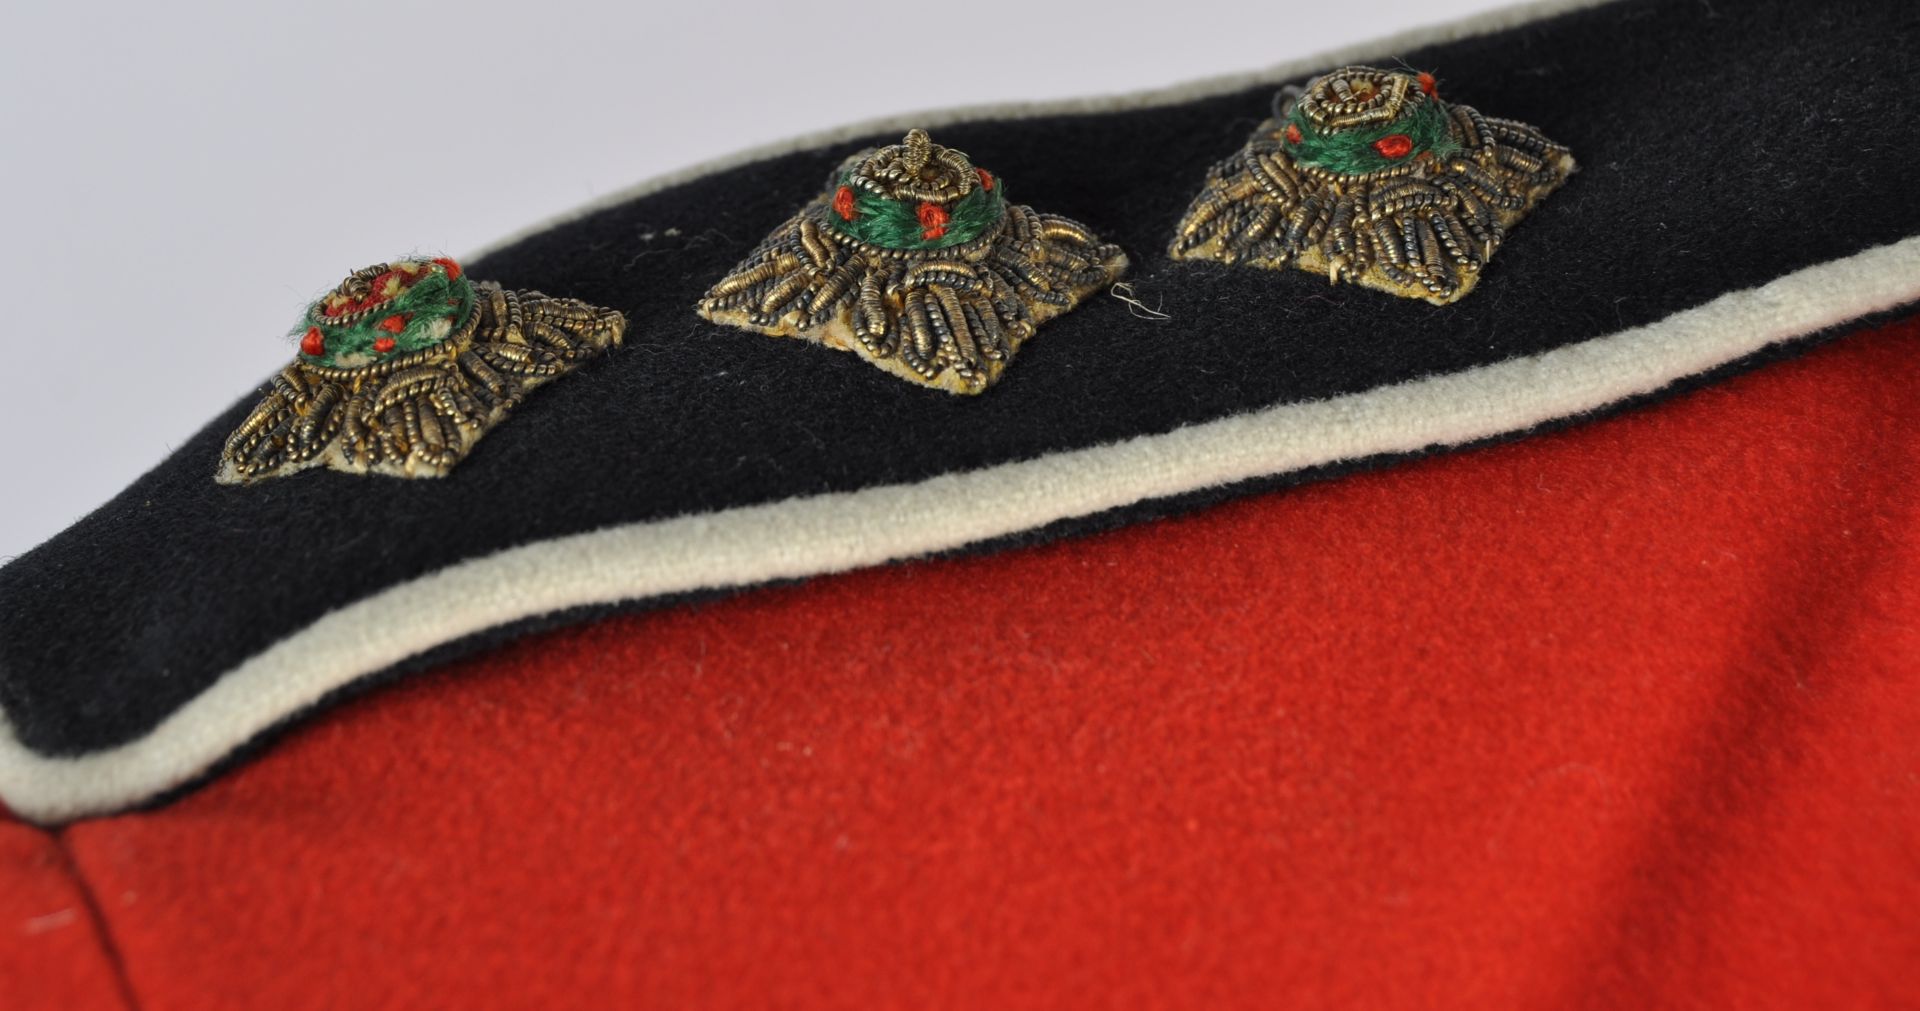 EARLY 20TH CENTURY ROYAL FUSILIERS CAPTAIN'S MESS JACKET - Image 4 of 6